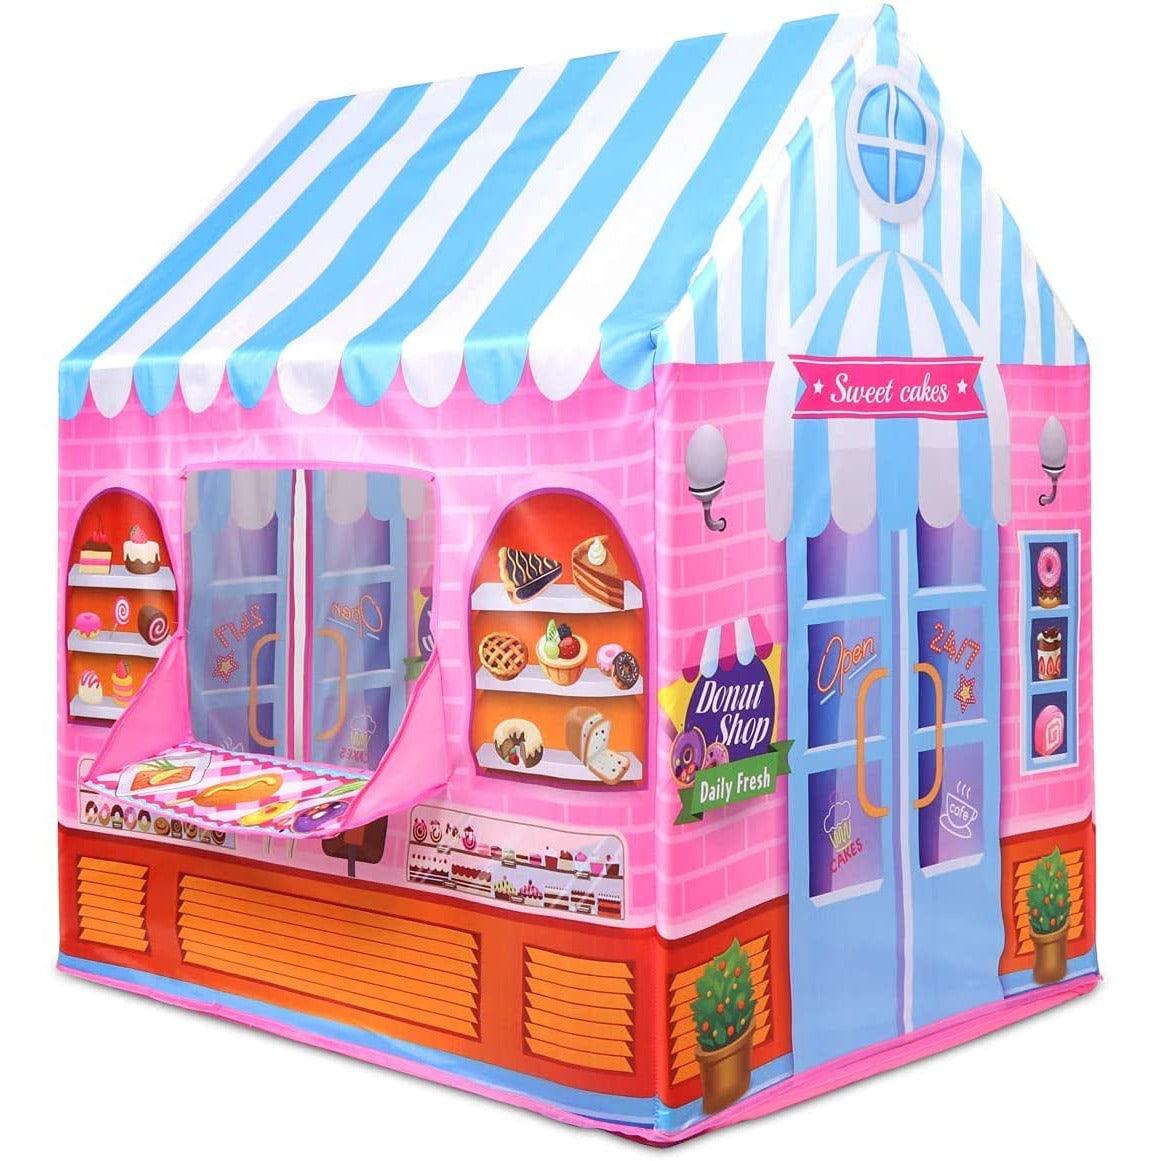 Candy House Play Tent For Kids - BumbleToys - 5-7 Years, Boys, Girls, Pre-Order, Tent, Toy Land